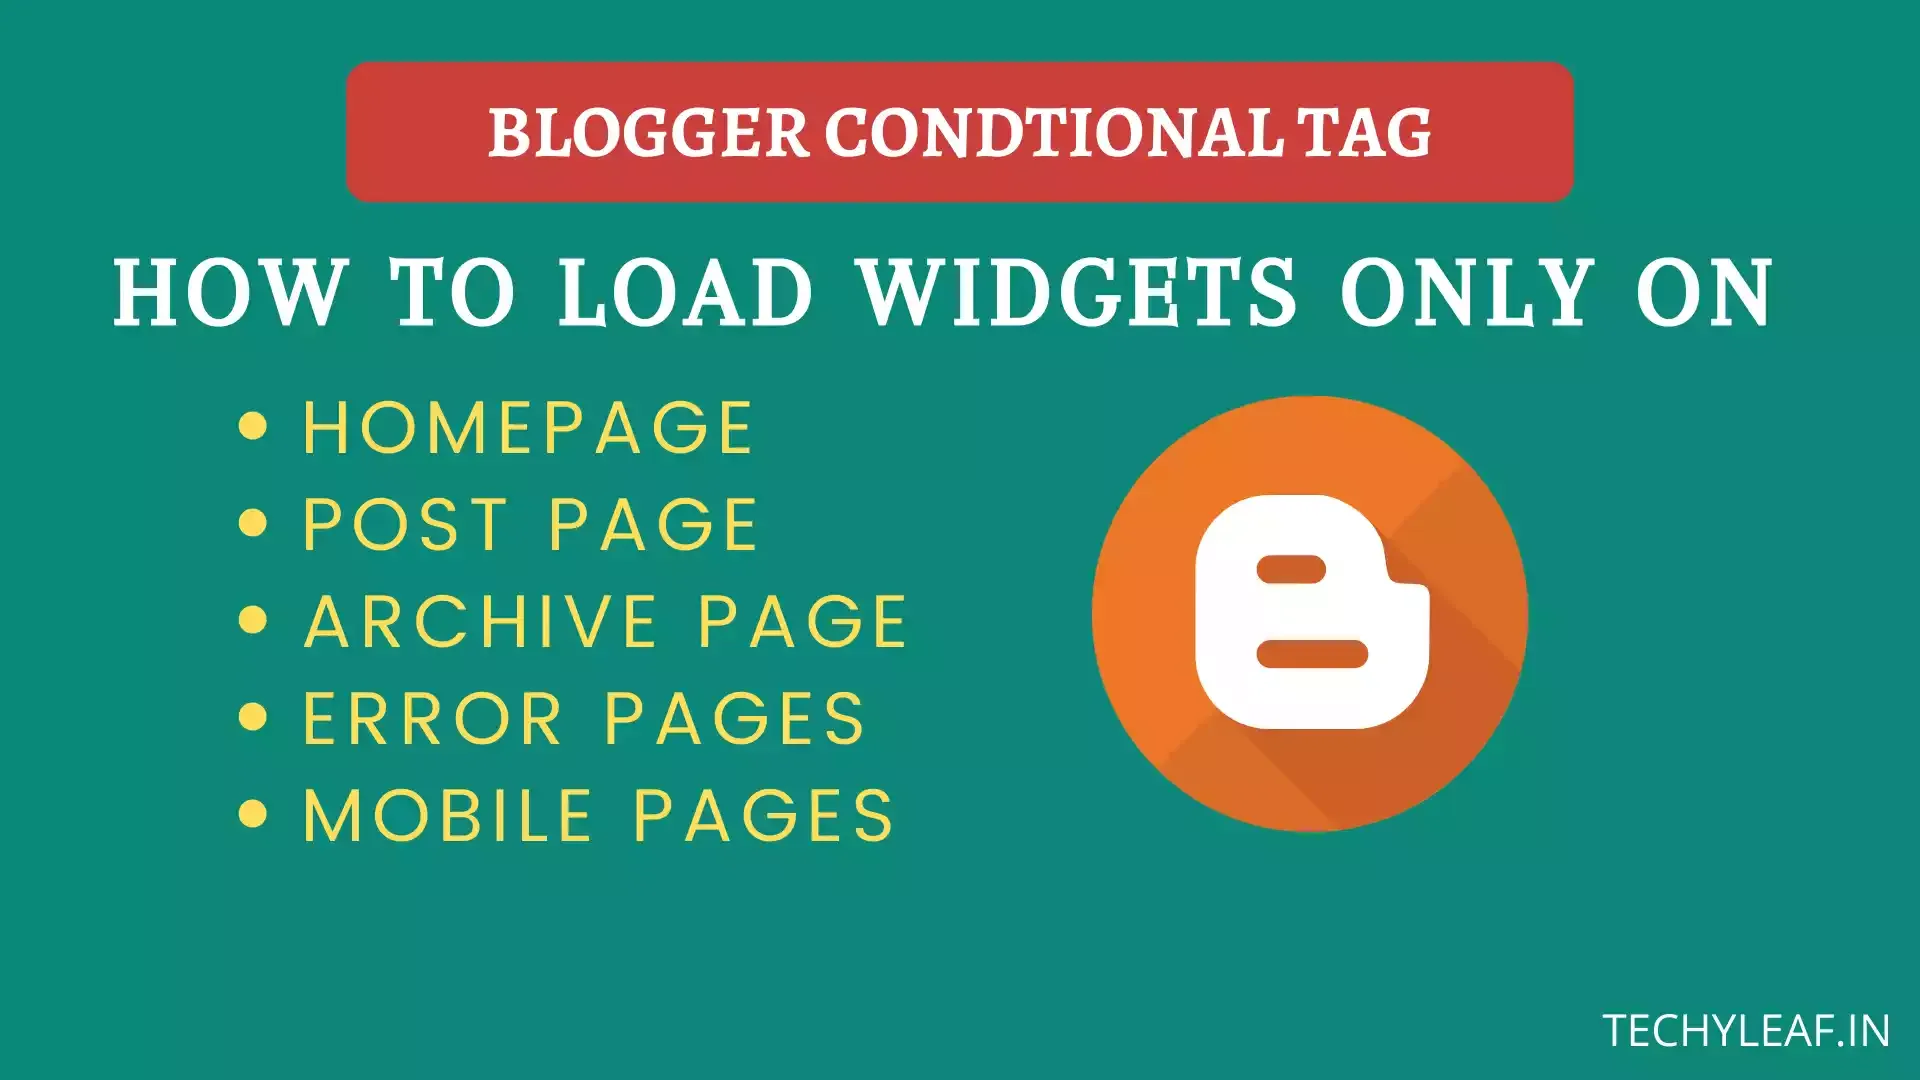 Blogger conditional tags